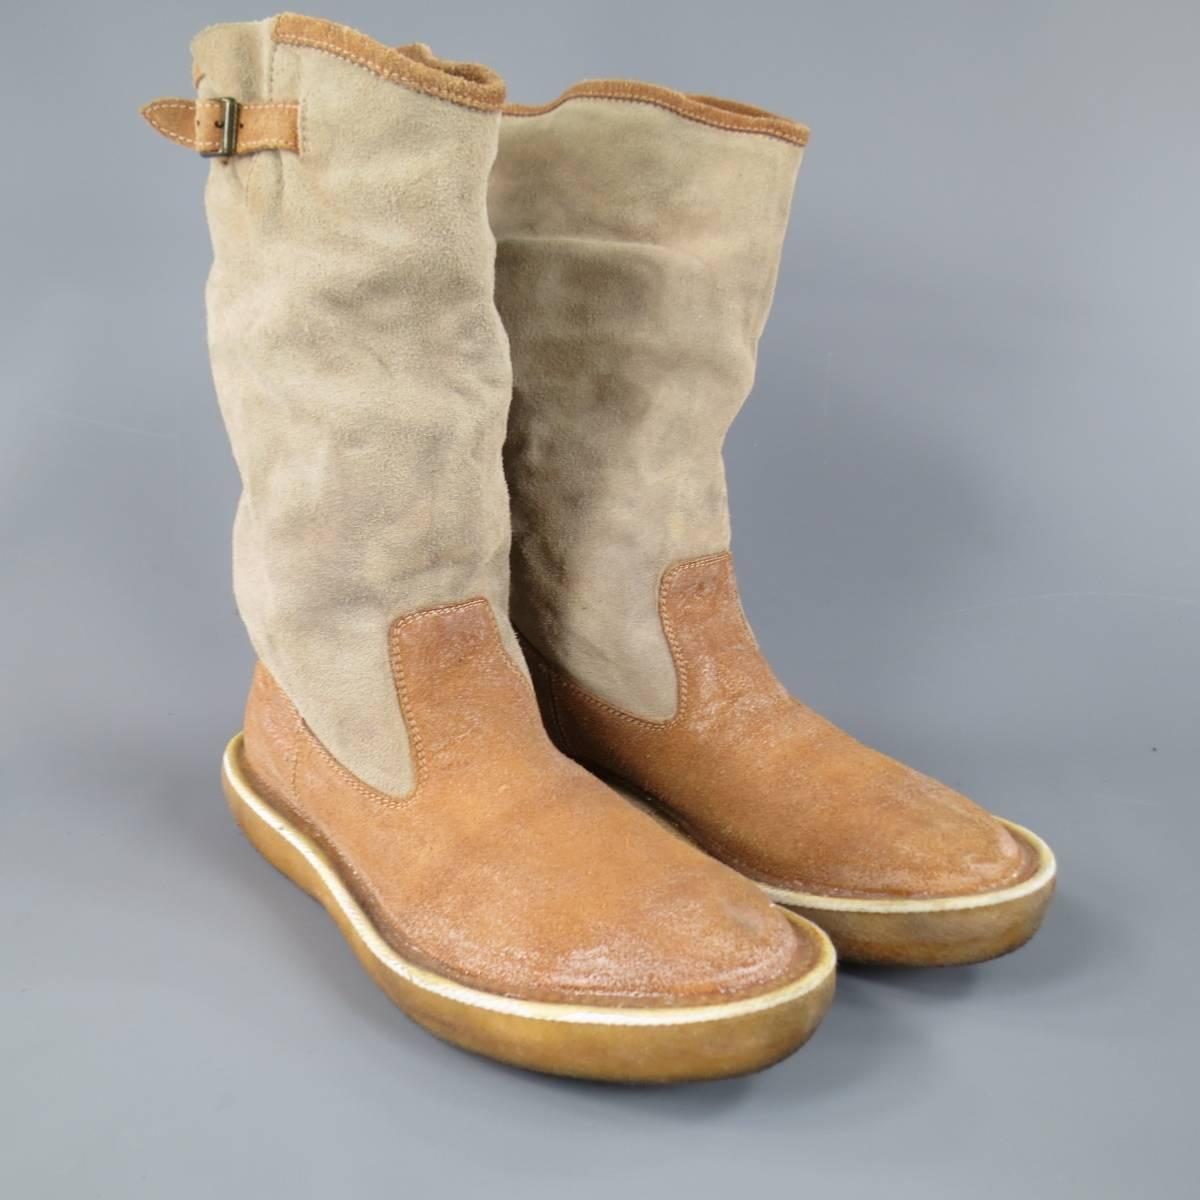 Rare KAPITAL Popeye calf high boots in a tan coated suede with a silver gray suede shaft and feature a thick crepe sole with tan rope piping and anchor logo. Made in Japan.
Retails at $780.00.

Good Excellent Pre-Owned Condition.
Marked: JP